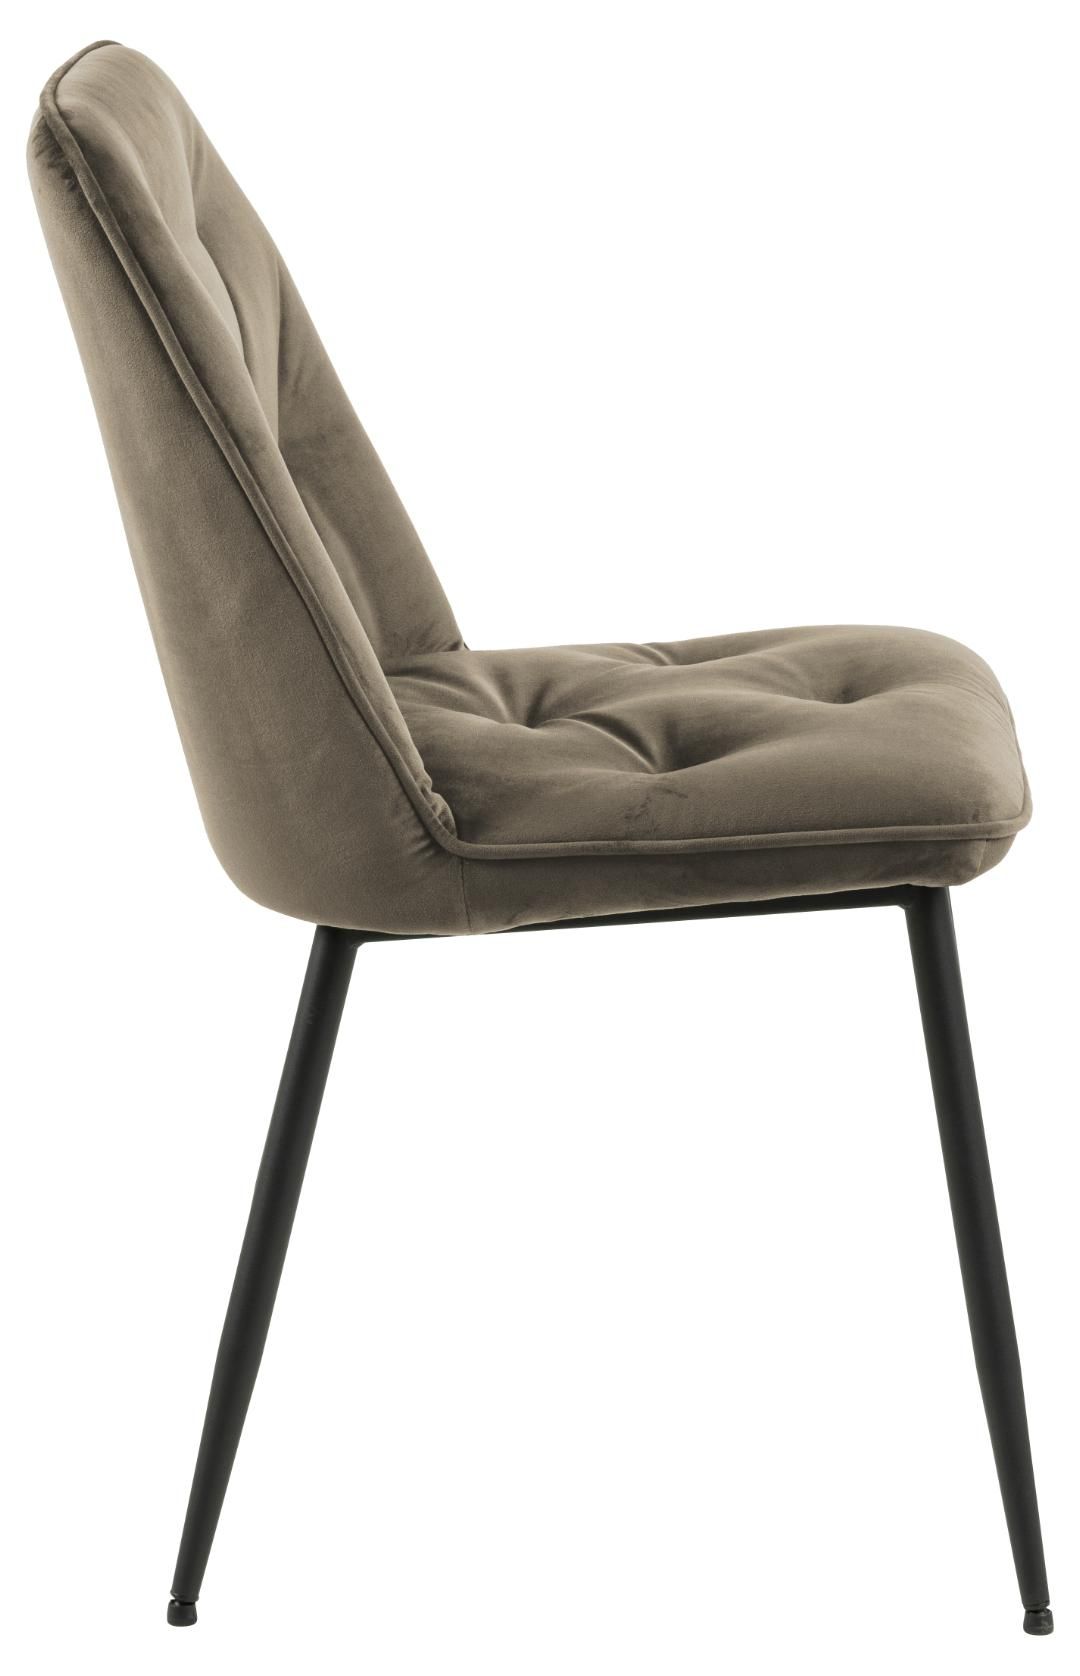 Brooke dining chair